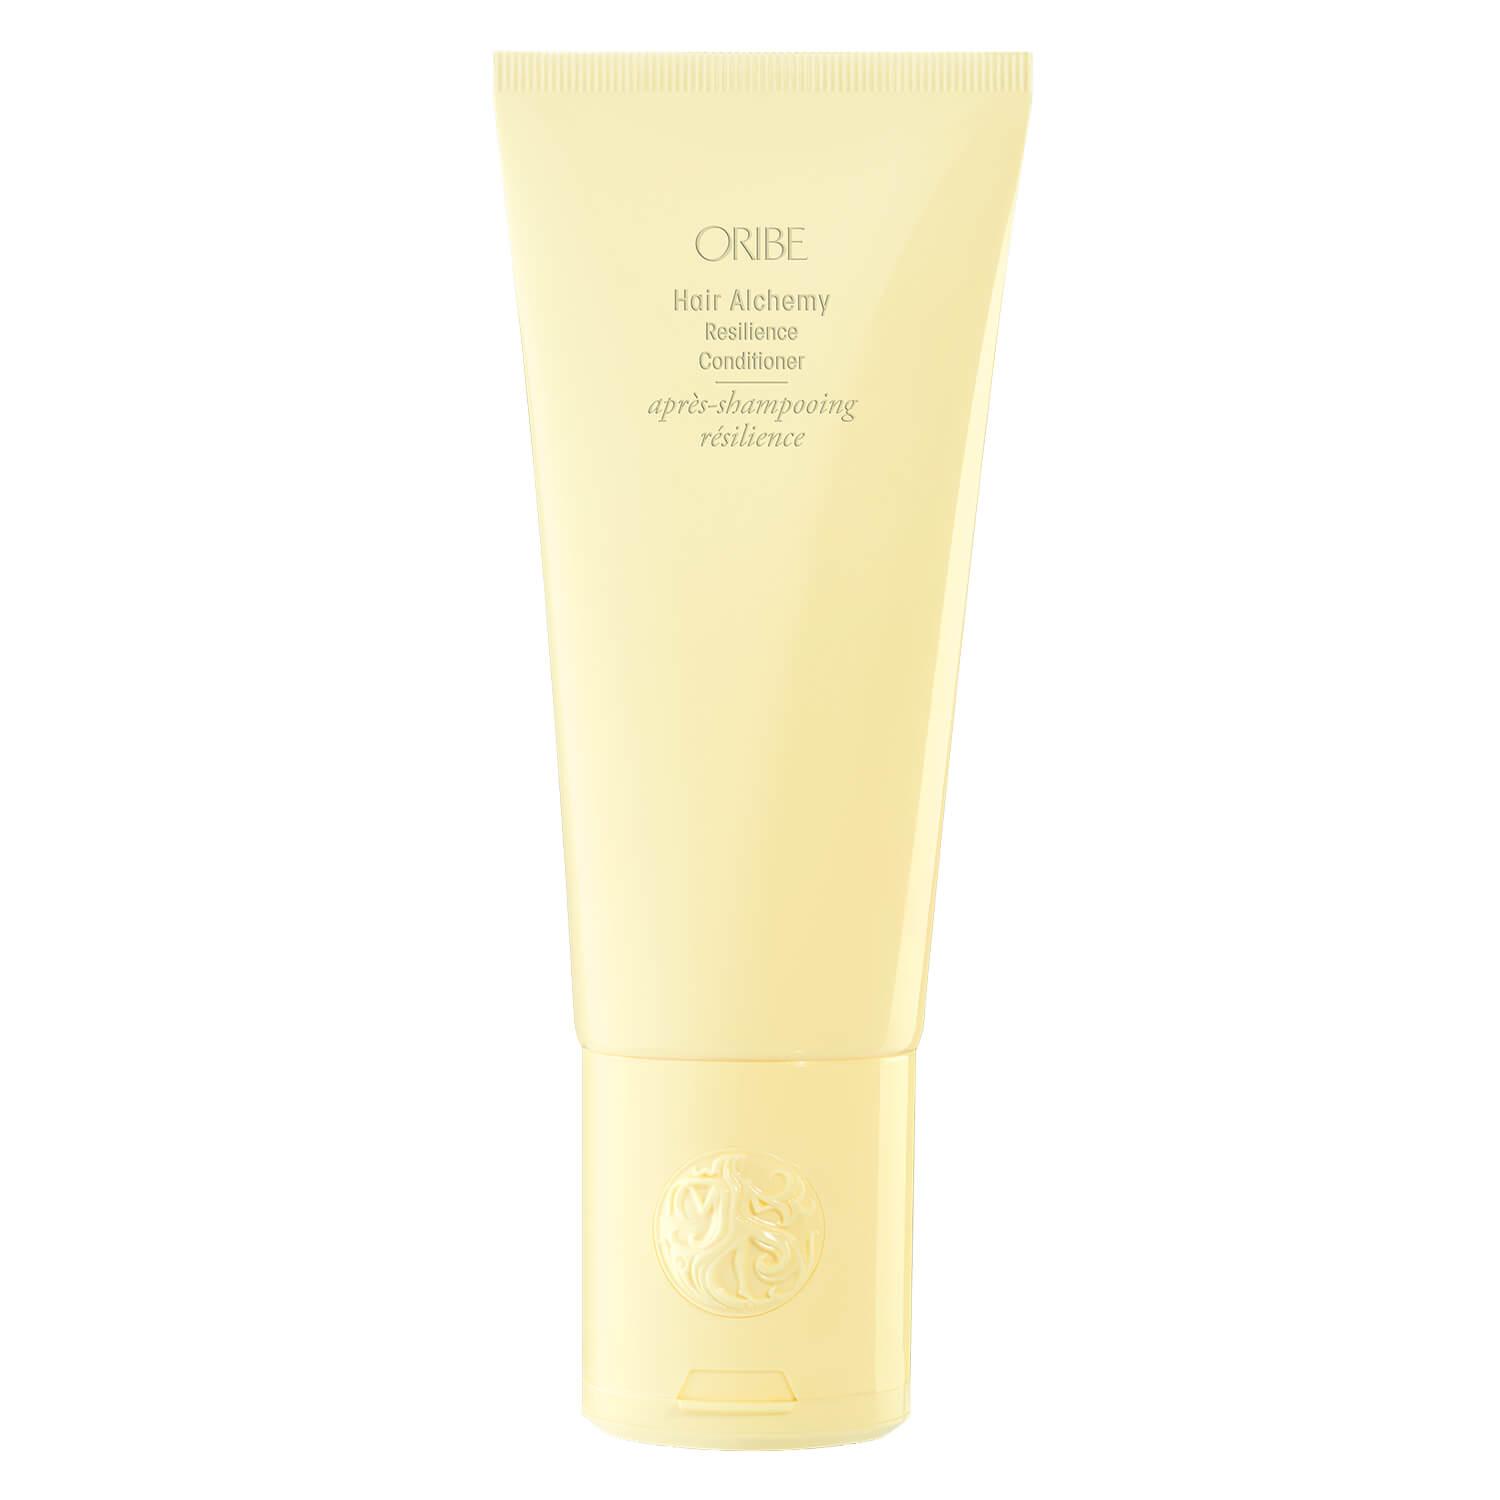 Oribe Care - Hair Alchemy Resilience Conditioner